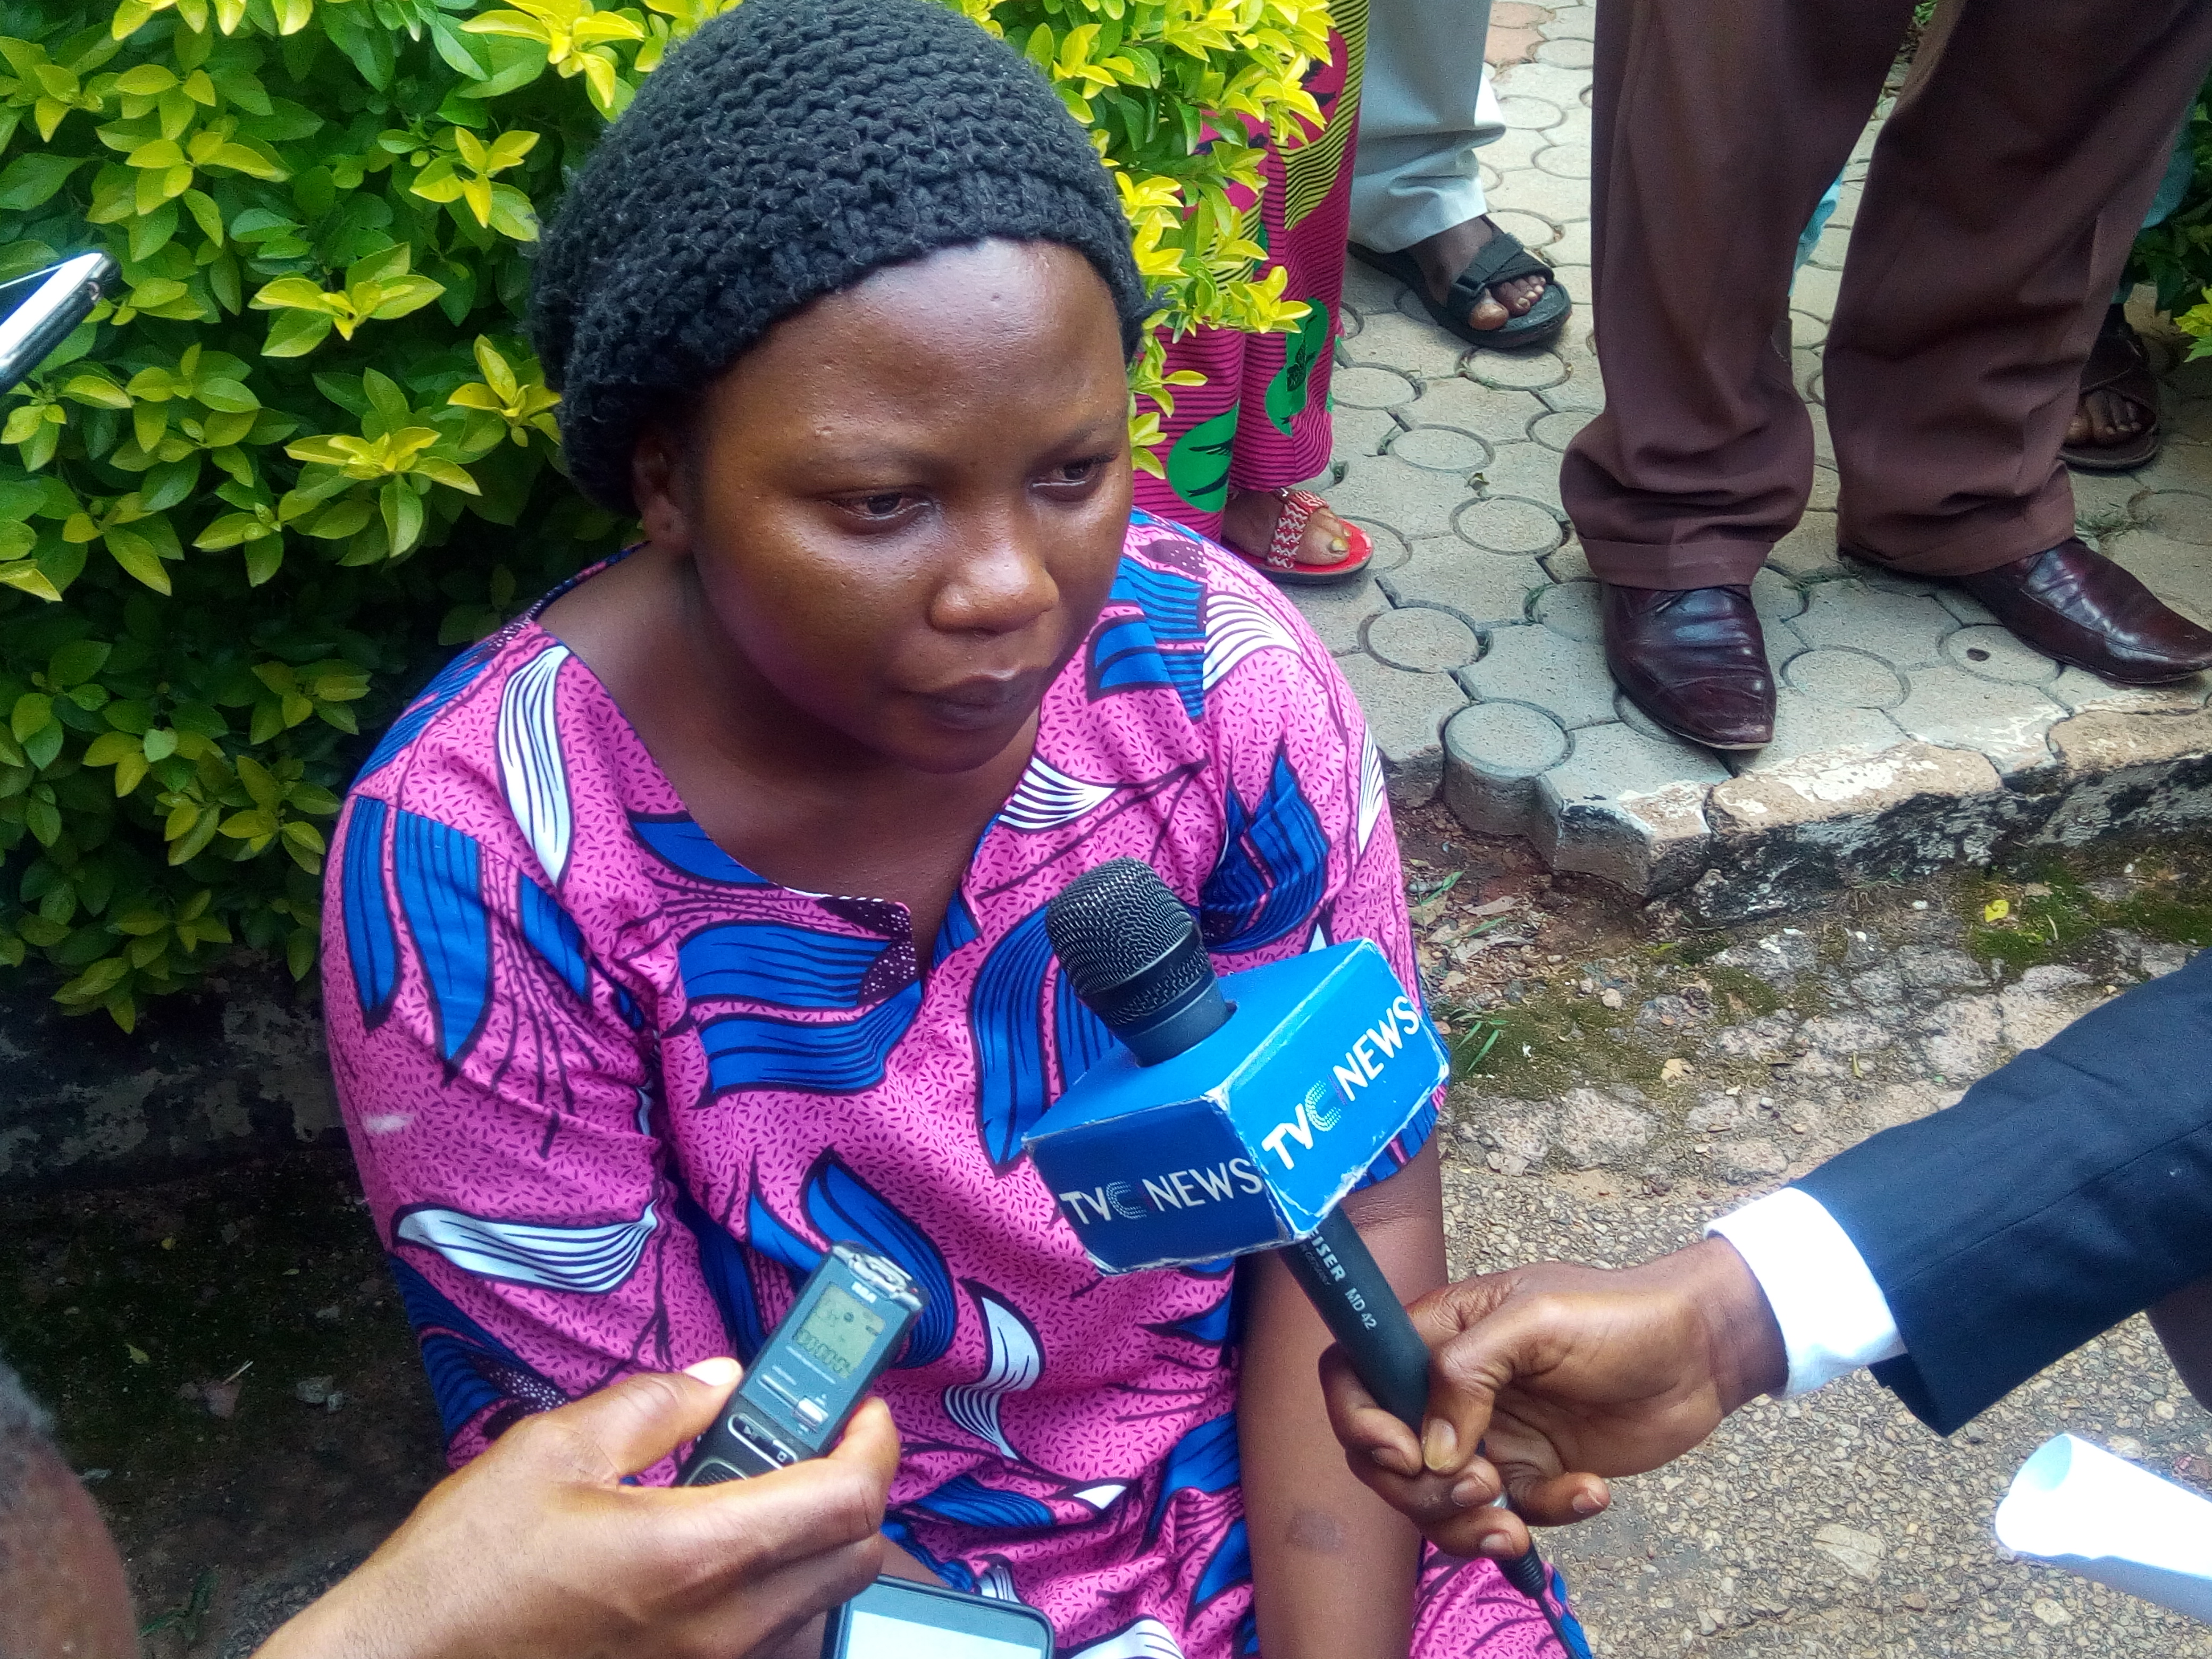 Nigeria's Plateau baby stealer says she wants a child to call her mother